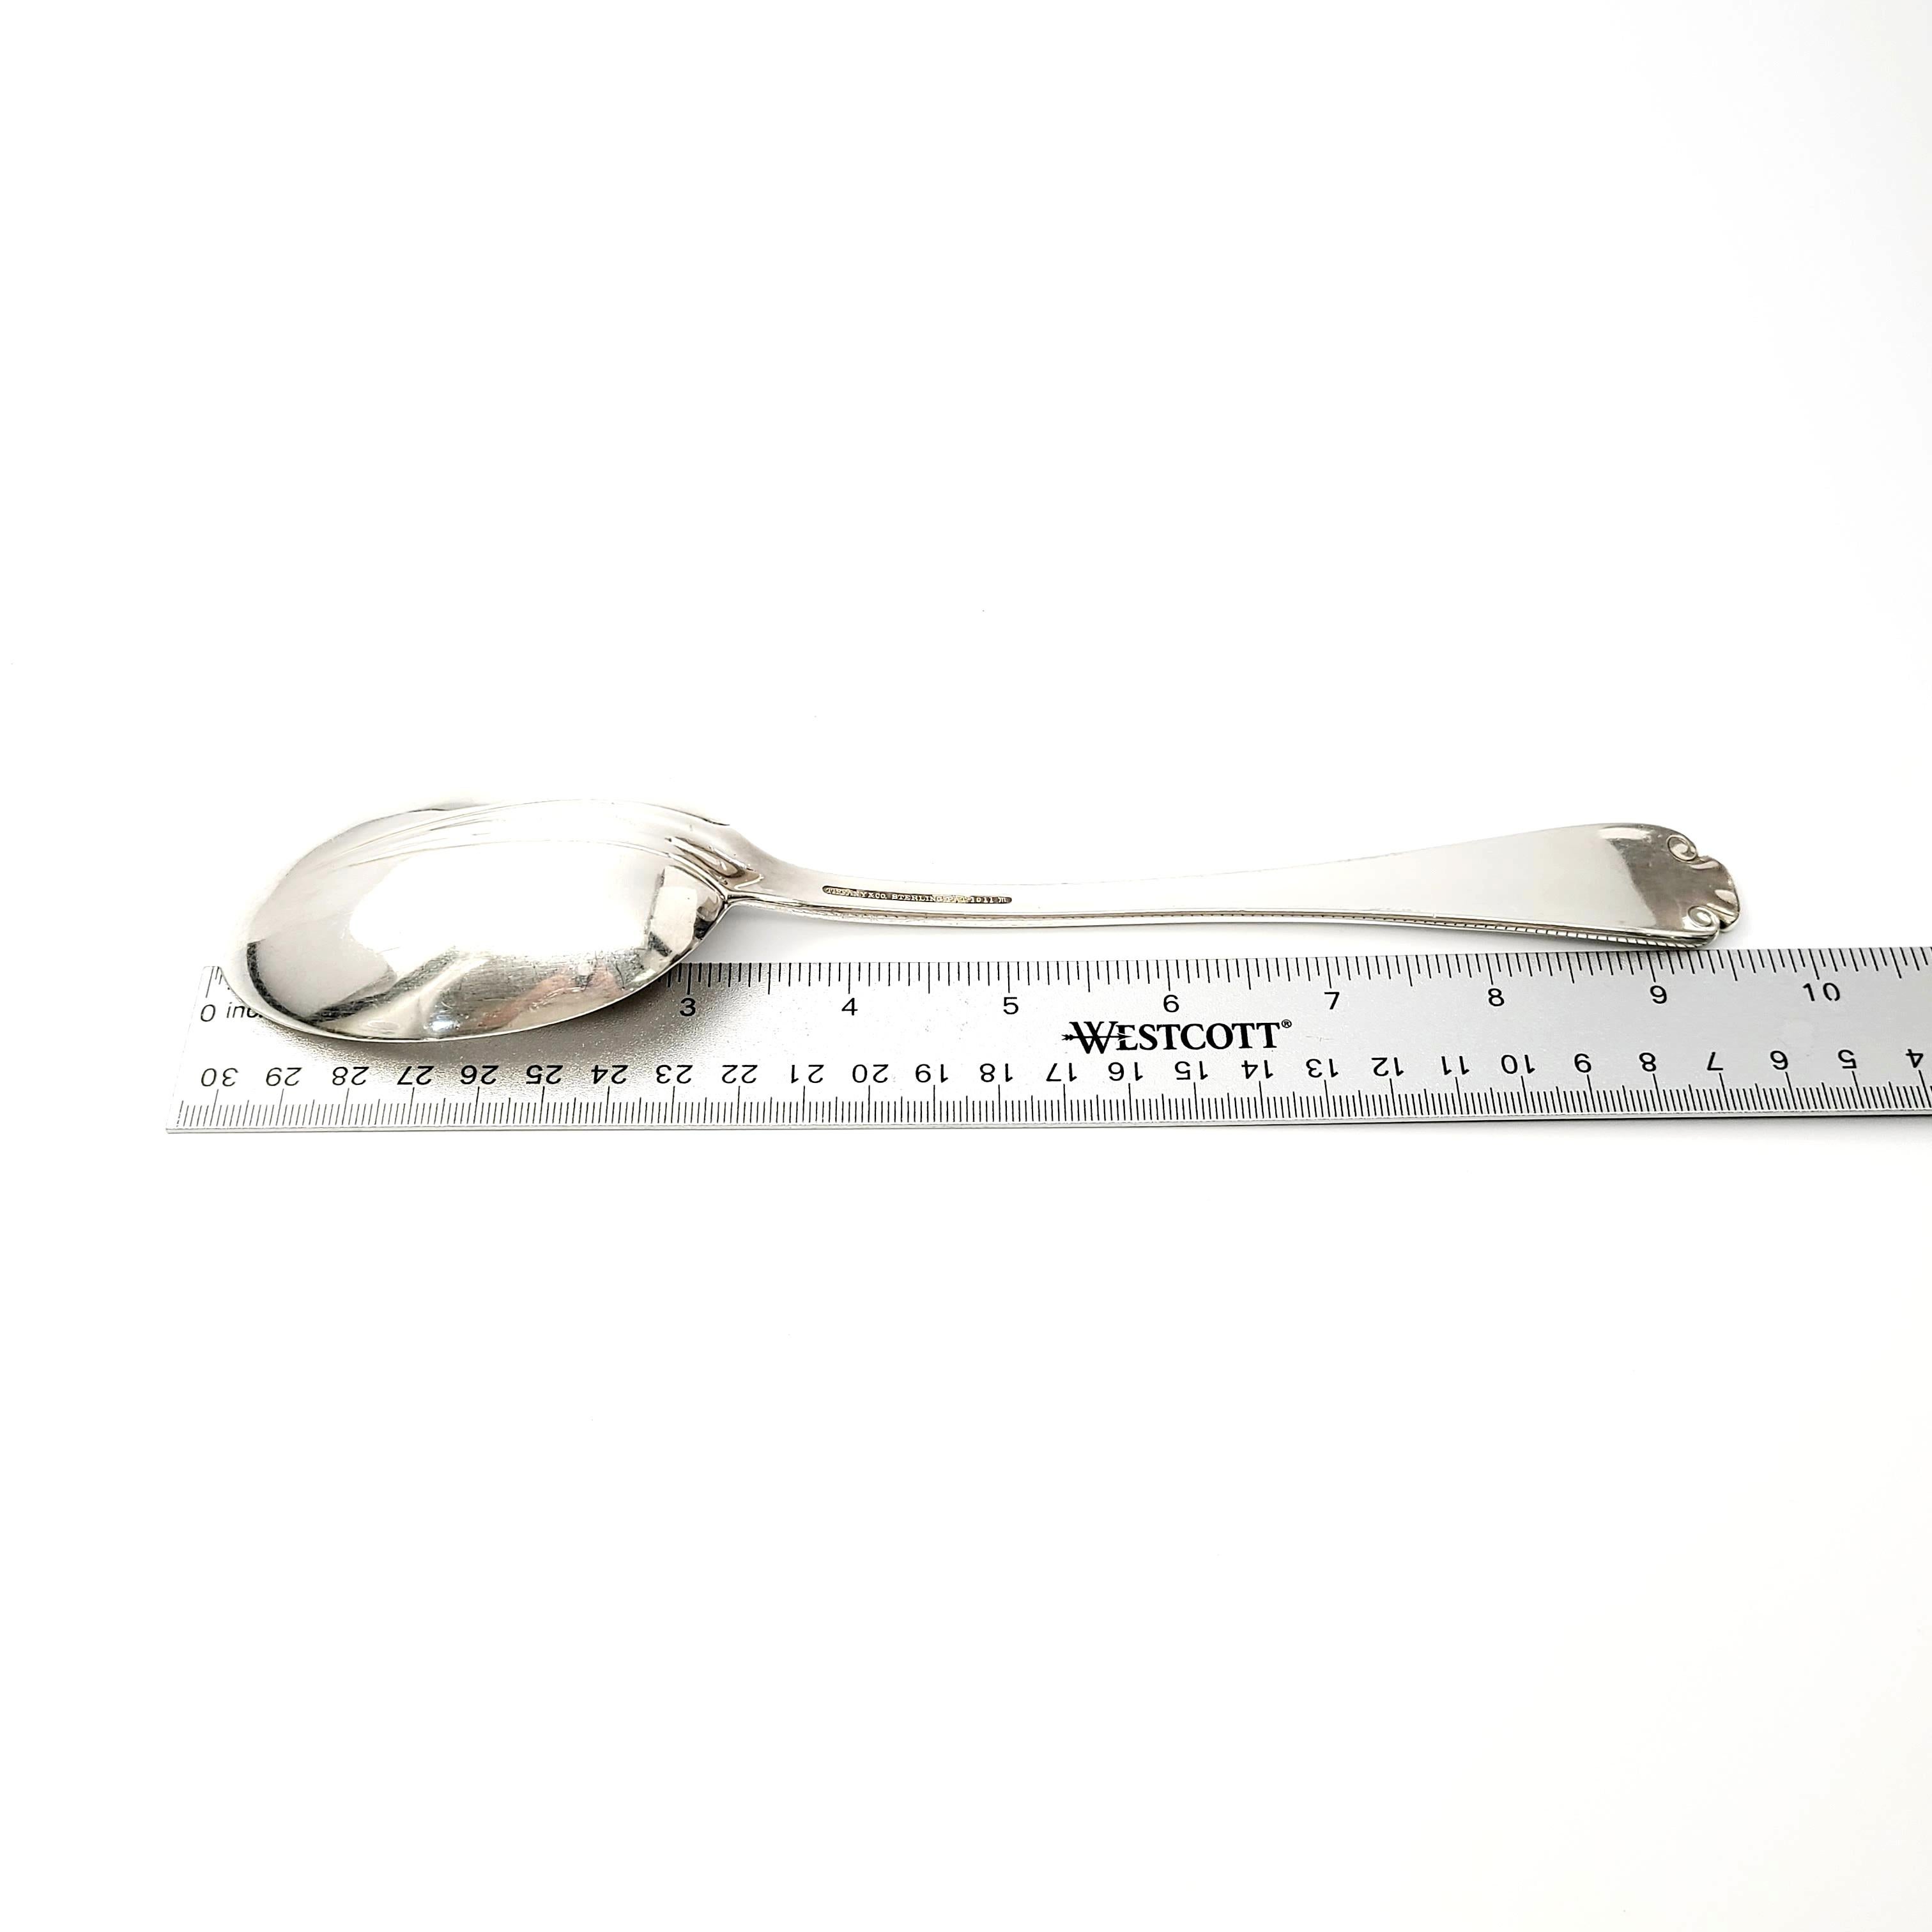 Tiffany & Co Flemish Sterling Silver Cold Meat Fork & Vegetable Serving Spoon B For Sale 5